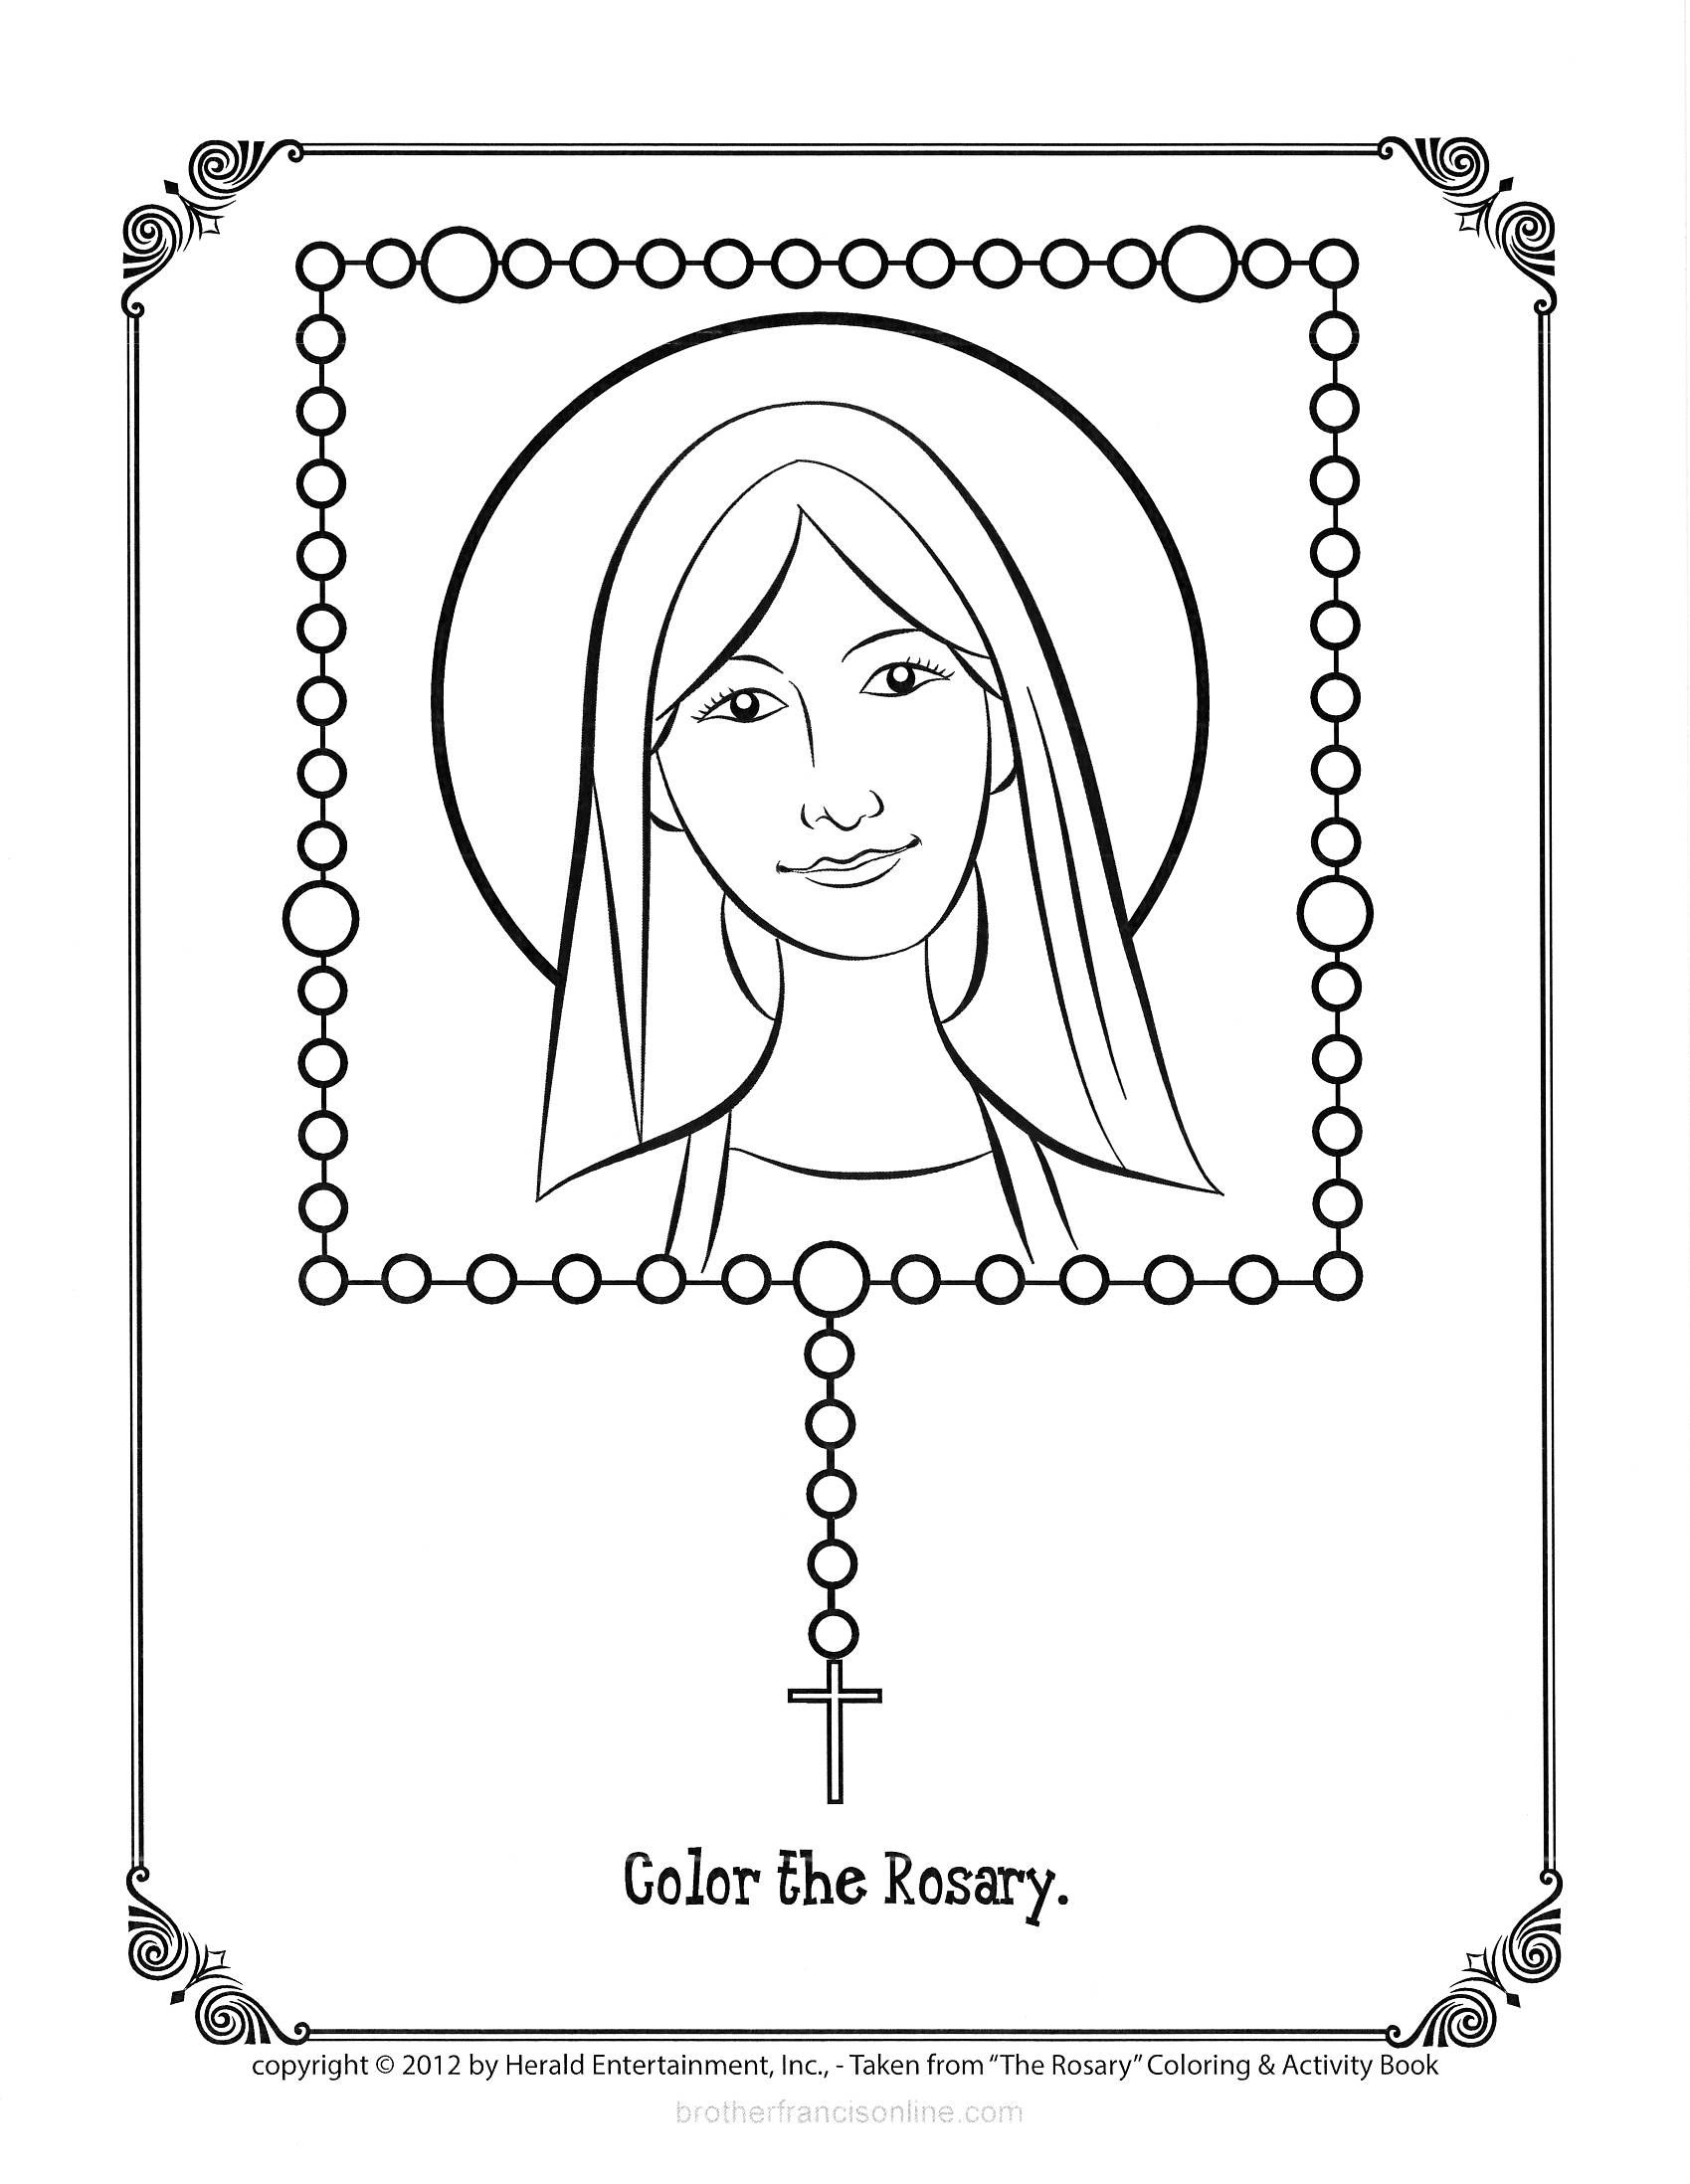 Pin by st agnes catholic church faith on april and may themes catholic coloring rosary coloring pages